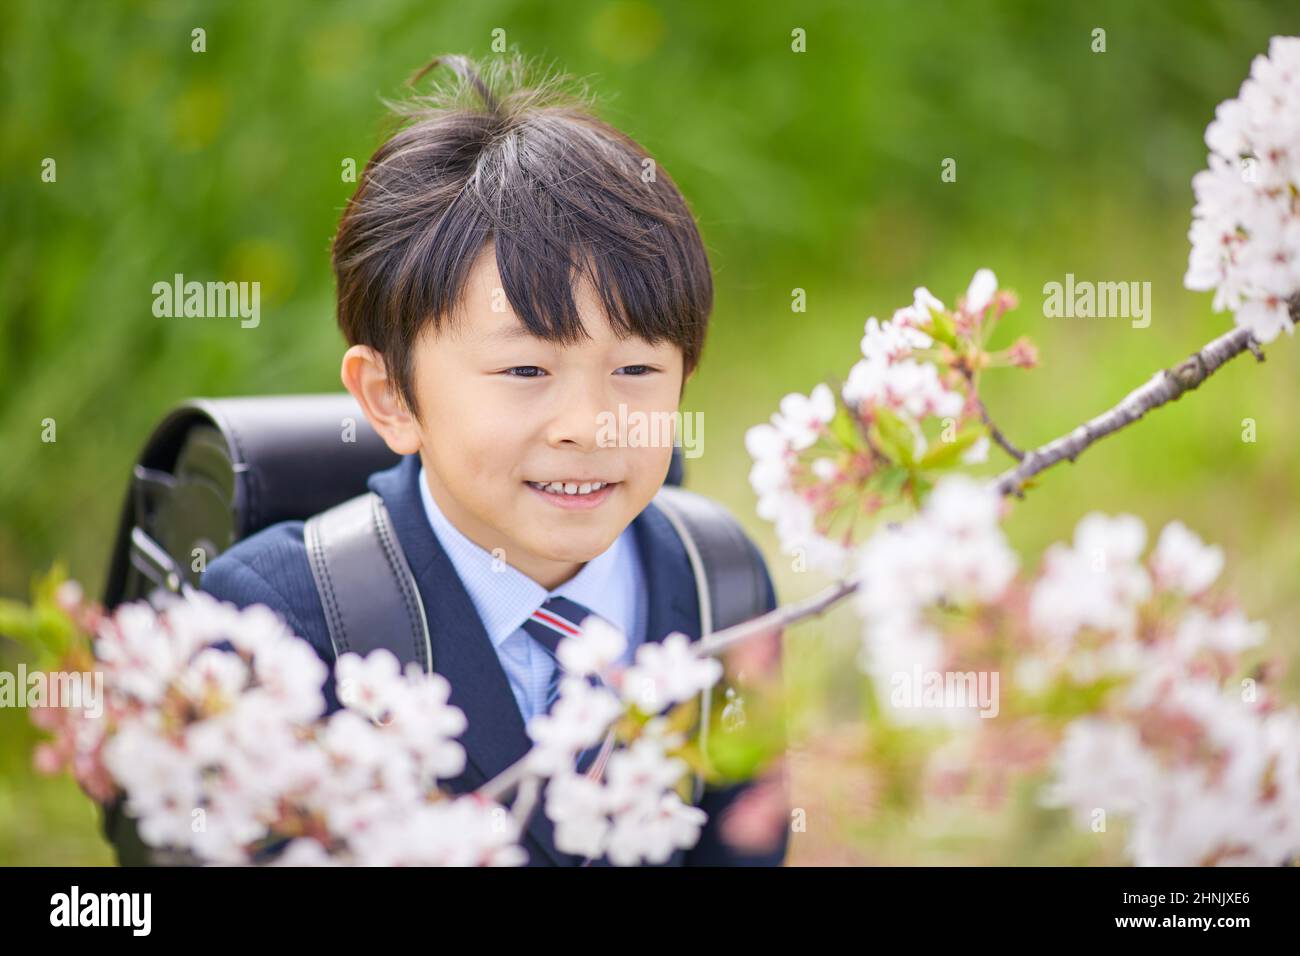 Japanese Elementary School Boy With Cherry Blossoms Stock Photo